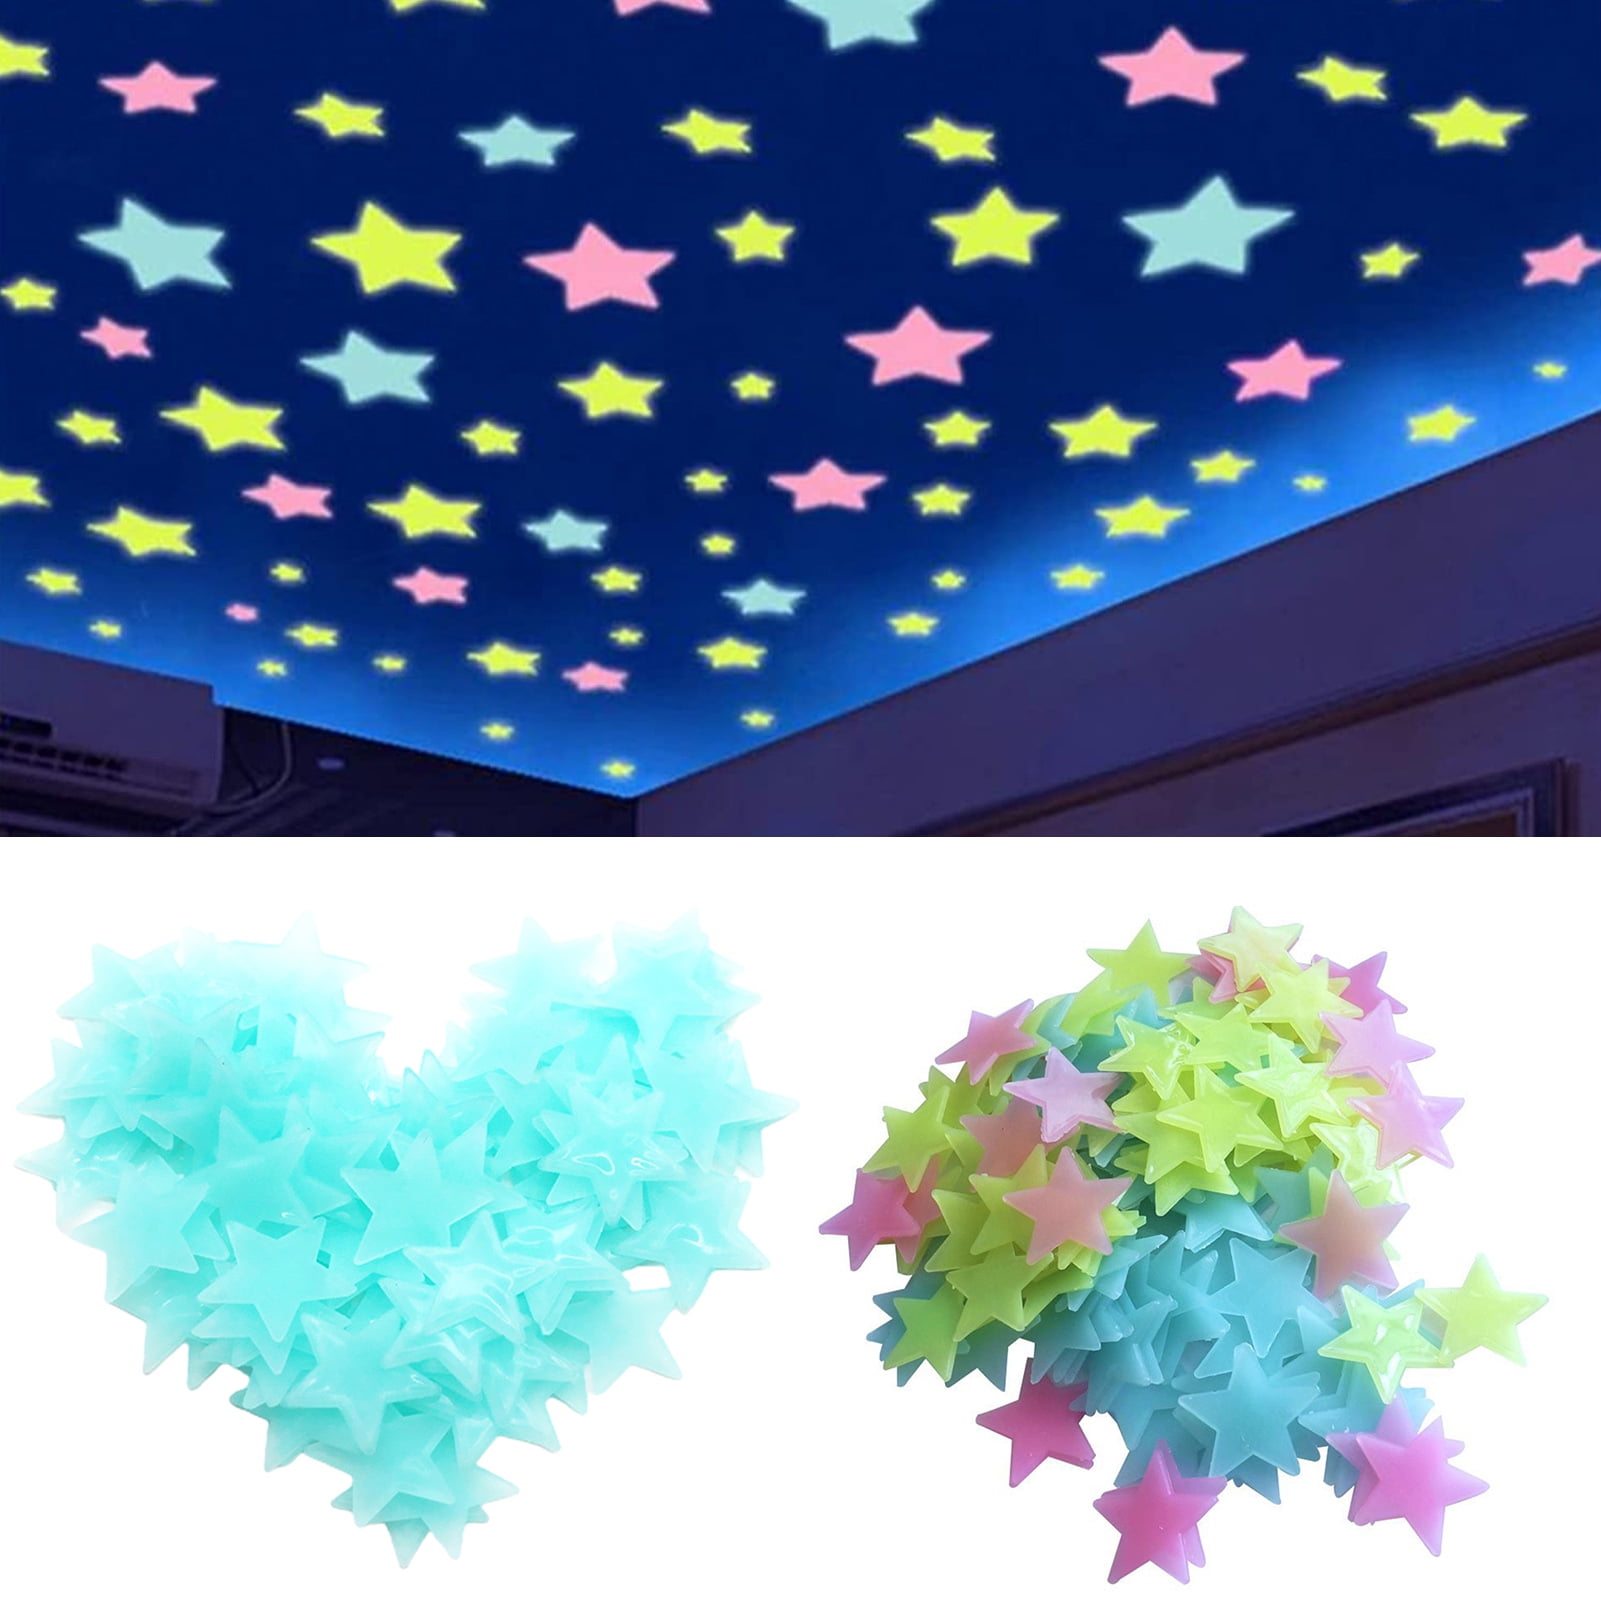 Details about   50pcs 3D Stars Glow In The Dark Wall Stickers For Kids Baby Room Bedroom 